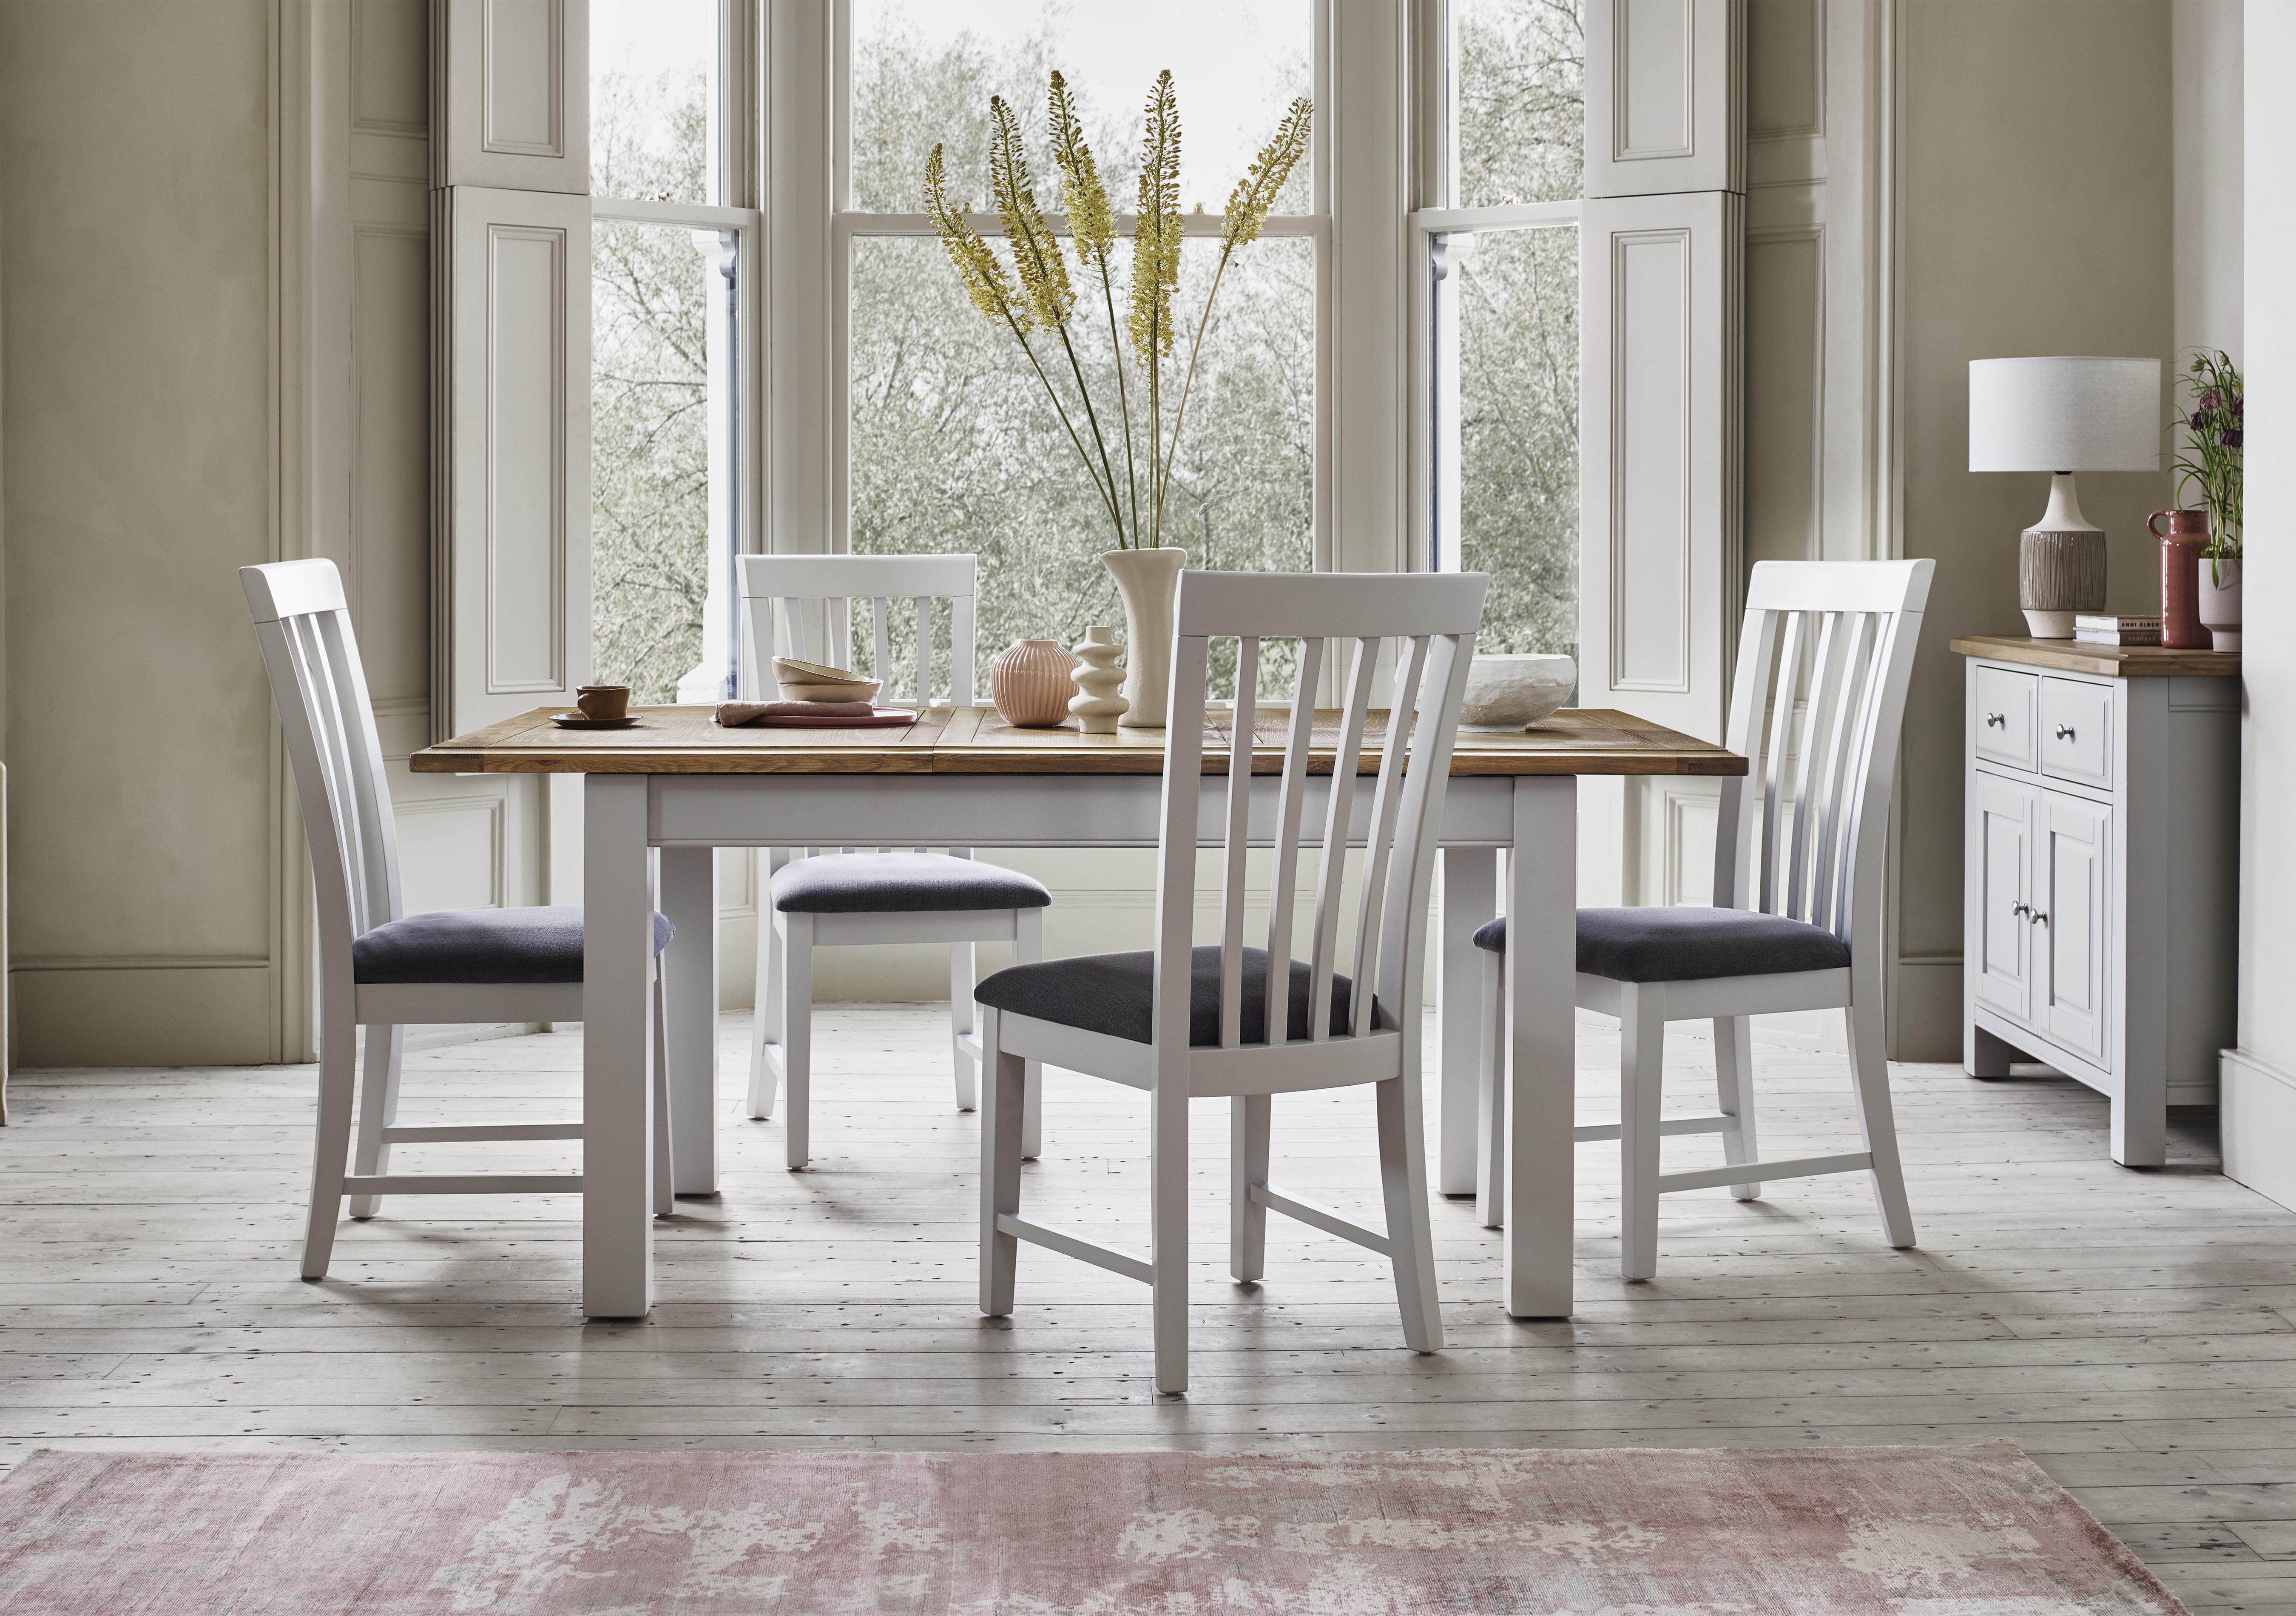 Hamilton Rectangular Extending Dining Table and 4 Wooden Dining Chairs in  on Furniture Village